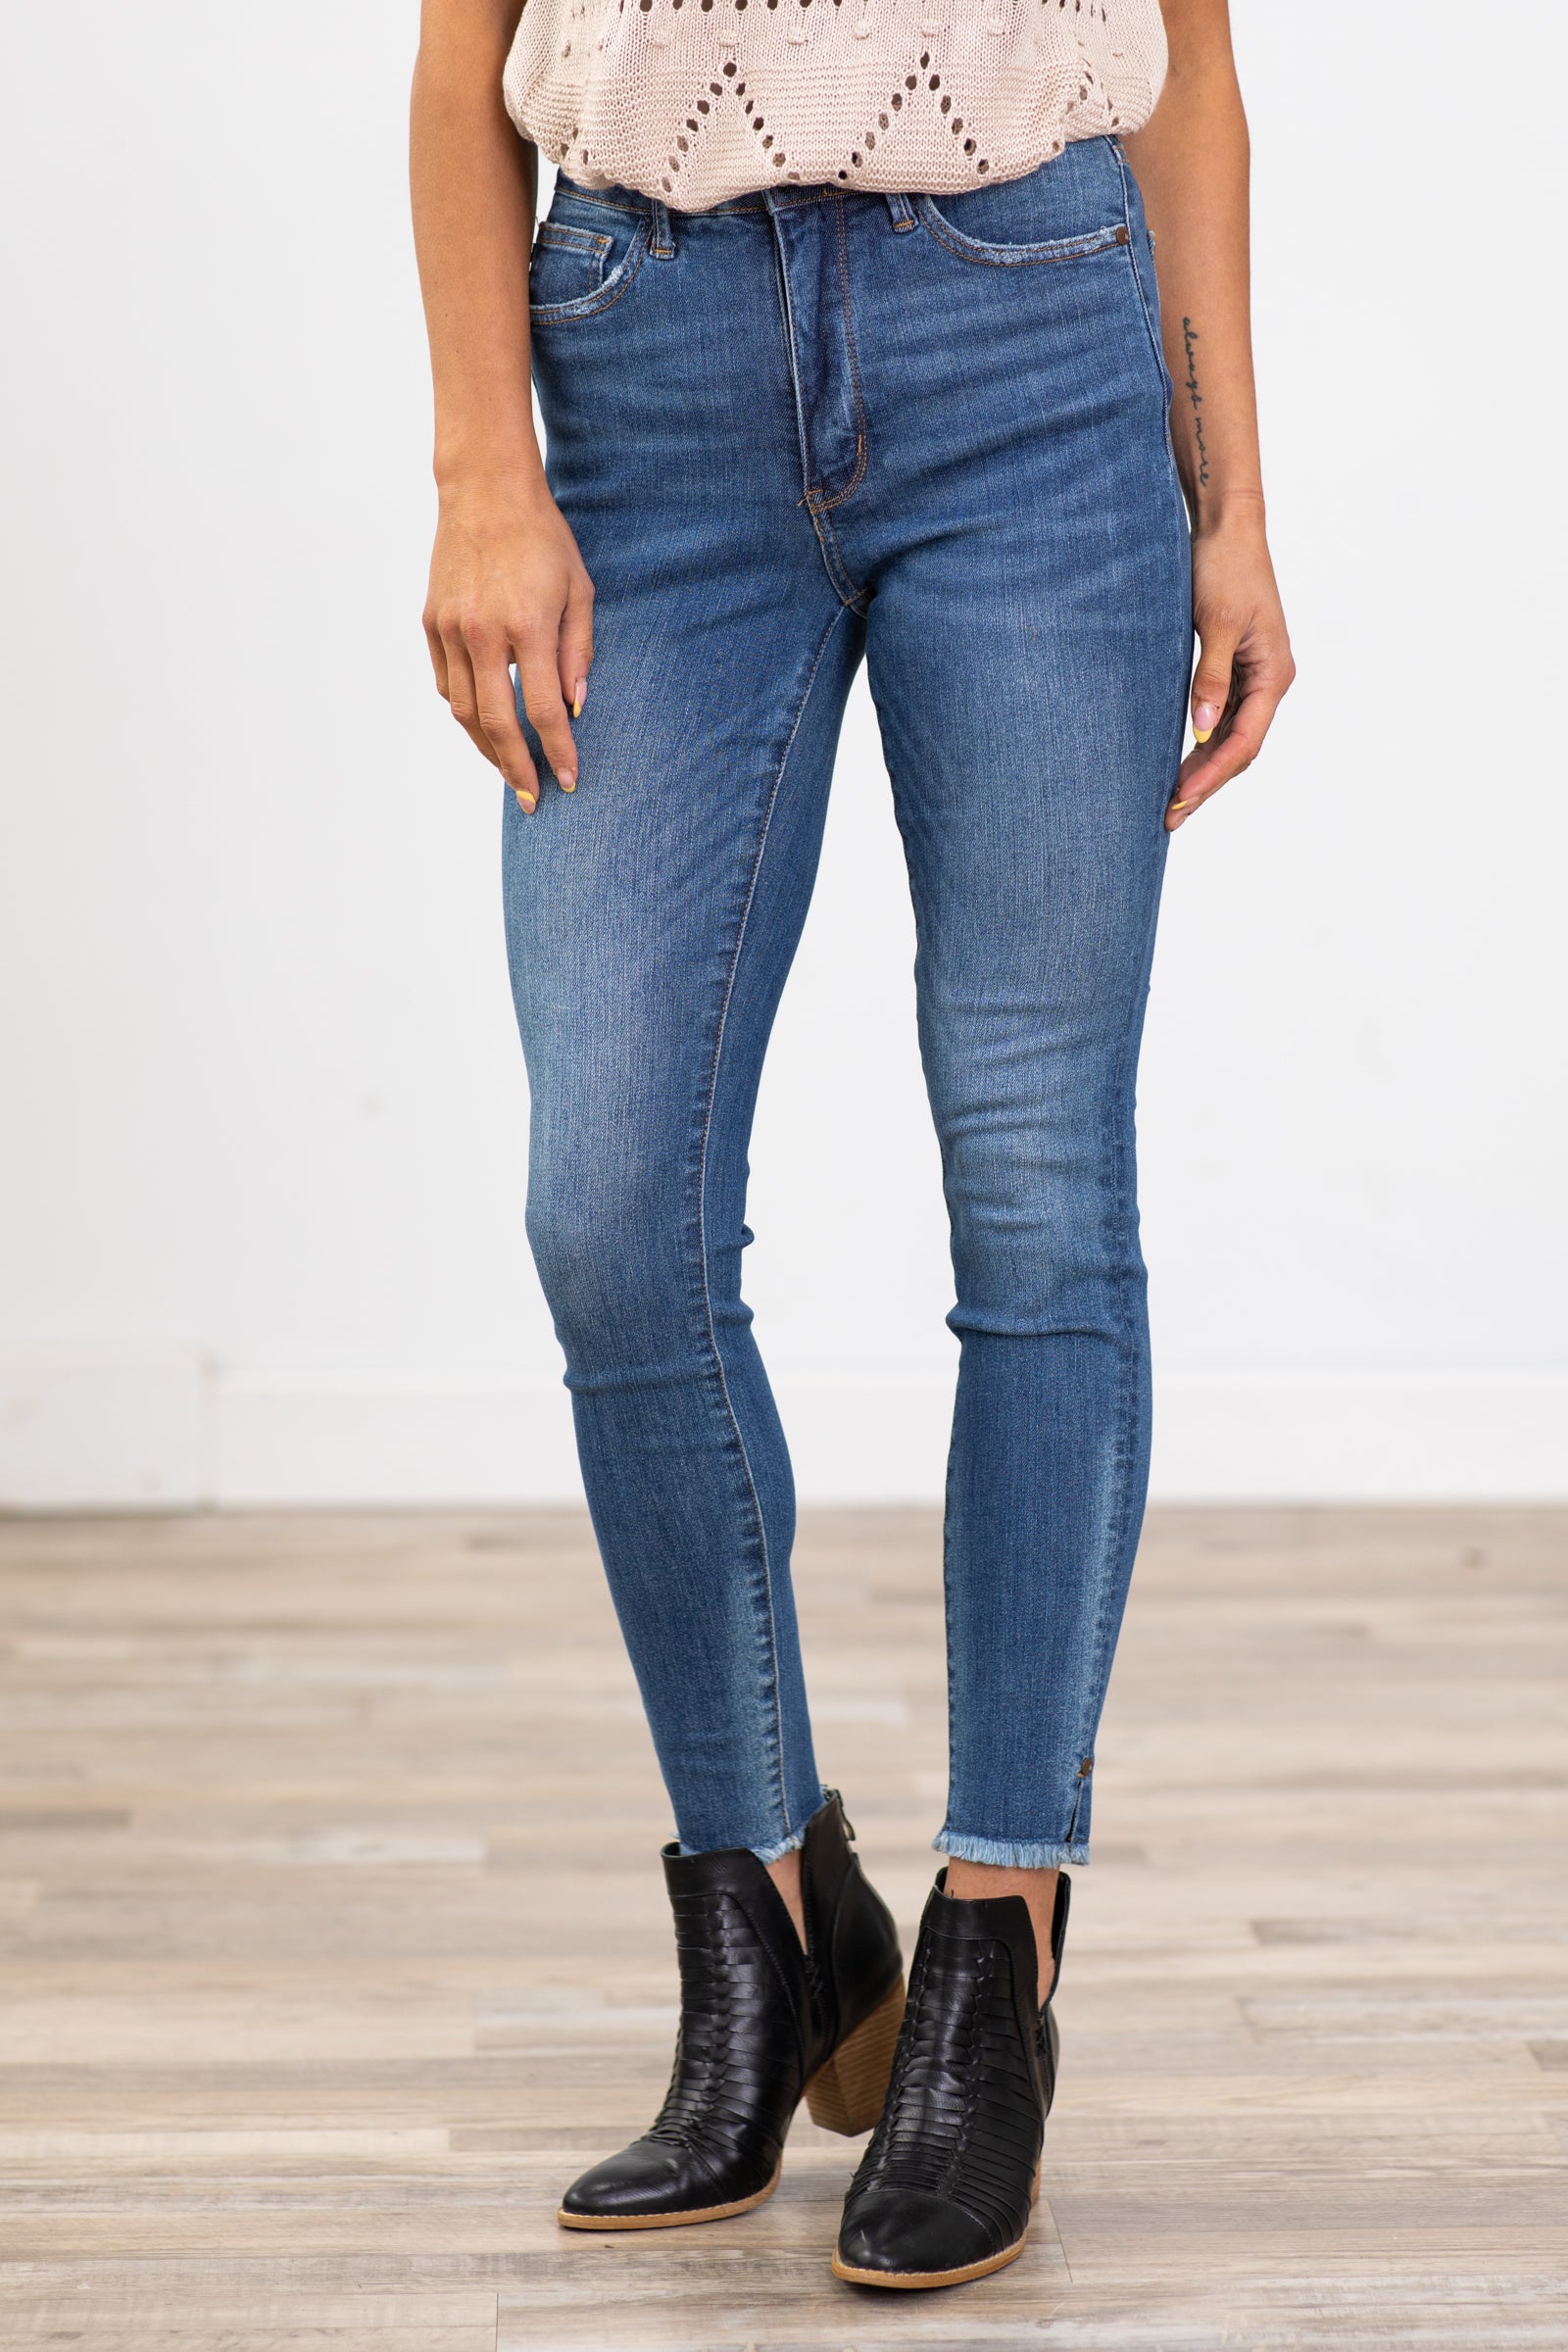 Judy Blue Tummy Control Jeans with Whiskering